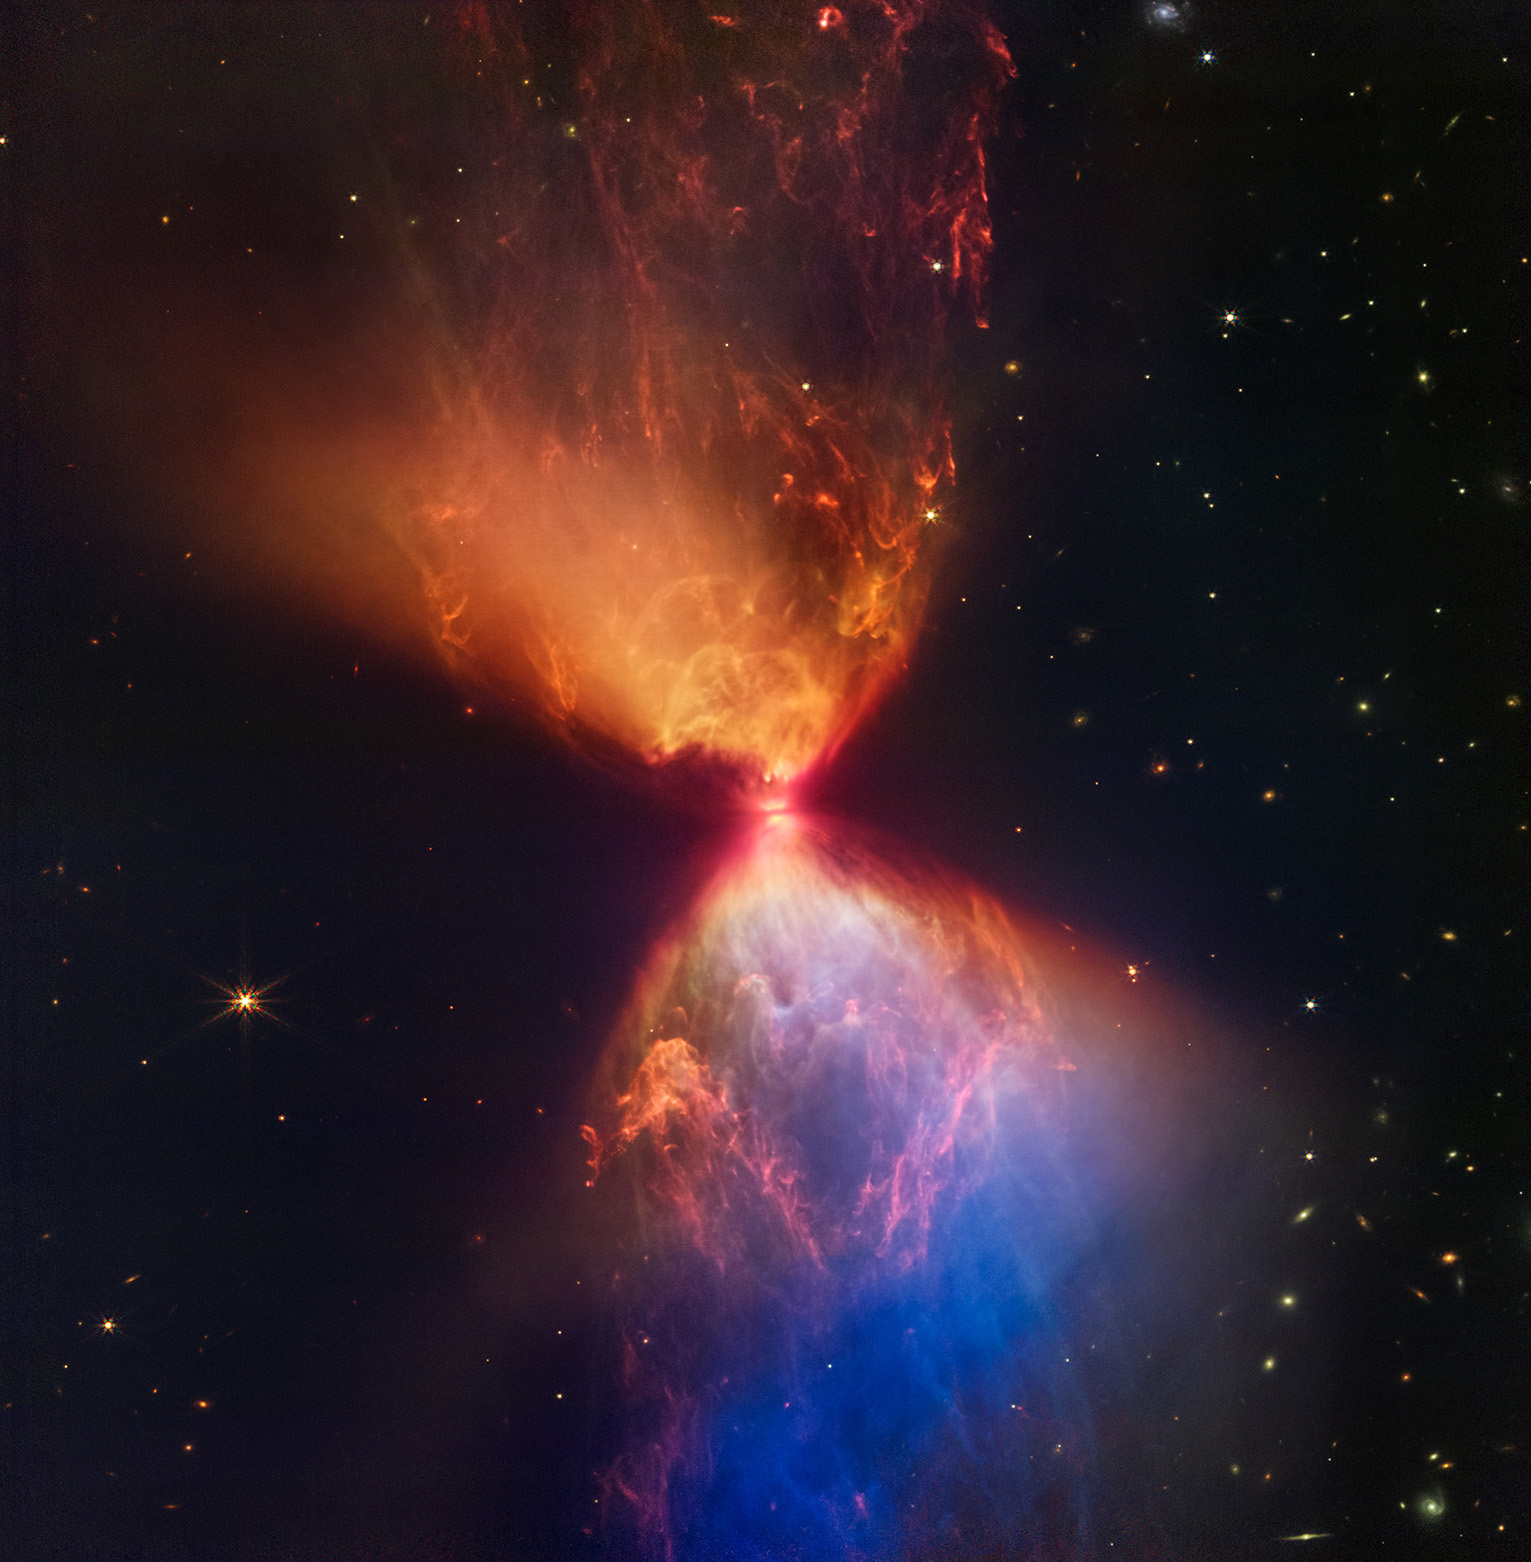 Featured in the IMAX® documentary DEEP SKY,  the protostar within the dark cloud L1527, shown in this image from JWST’s Near-Infrared Camera (NIRCam), is embedded within a cloud of material feeding its growth. Ejections from the star have cleared out cavities above and below it, whose boundaries glow orange and blue in this infrared view.